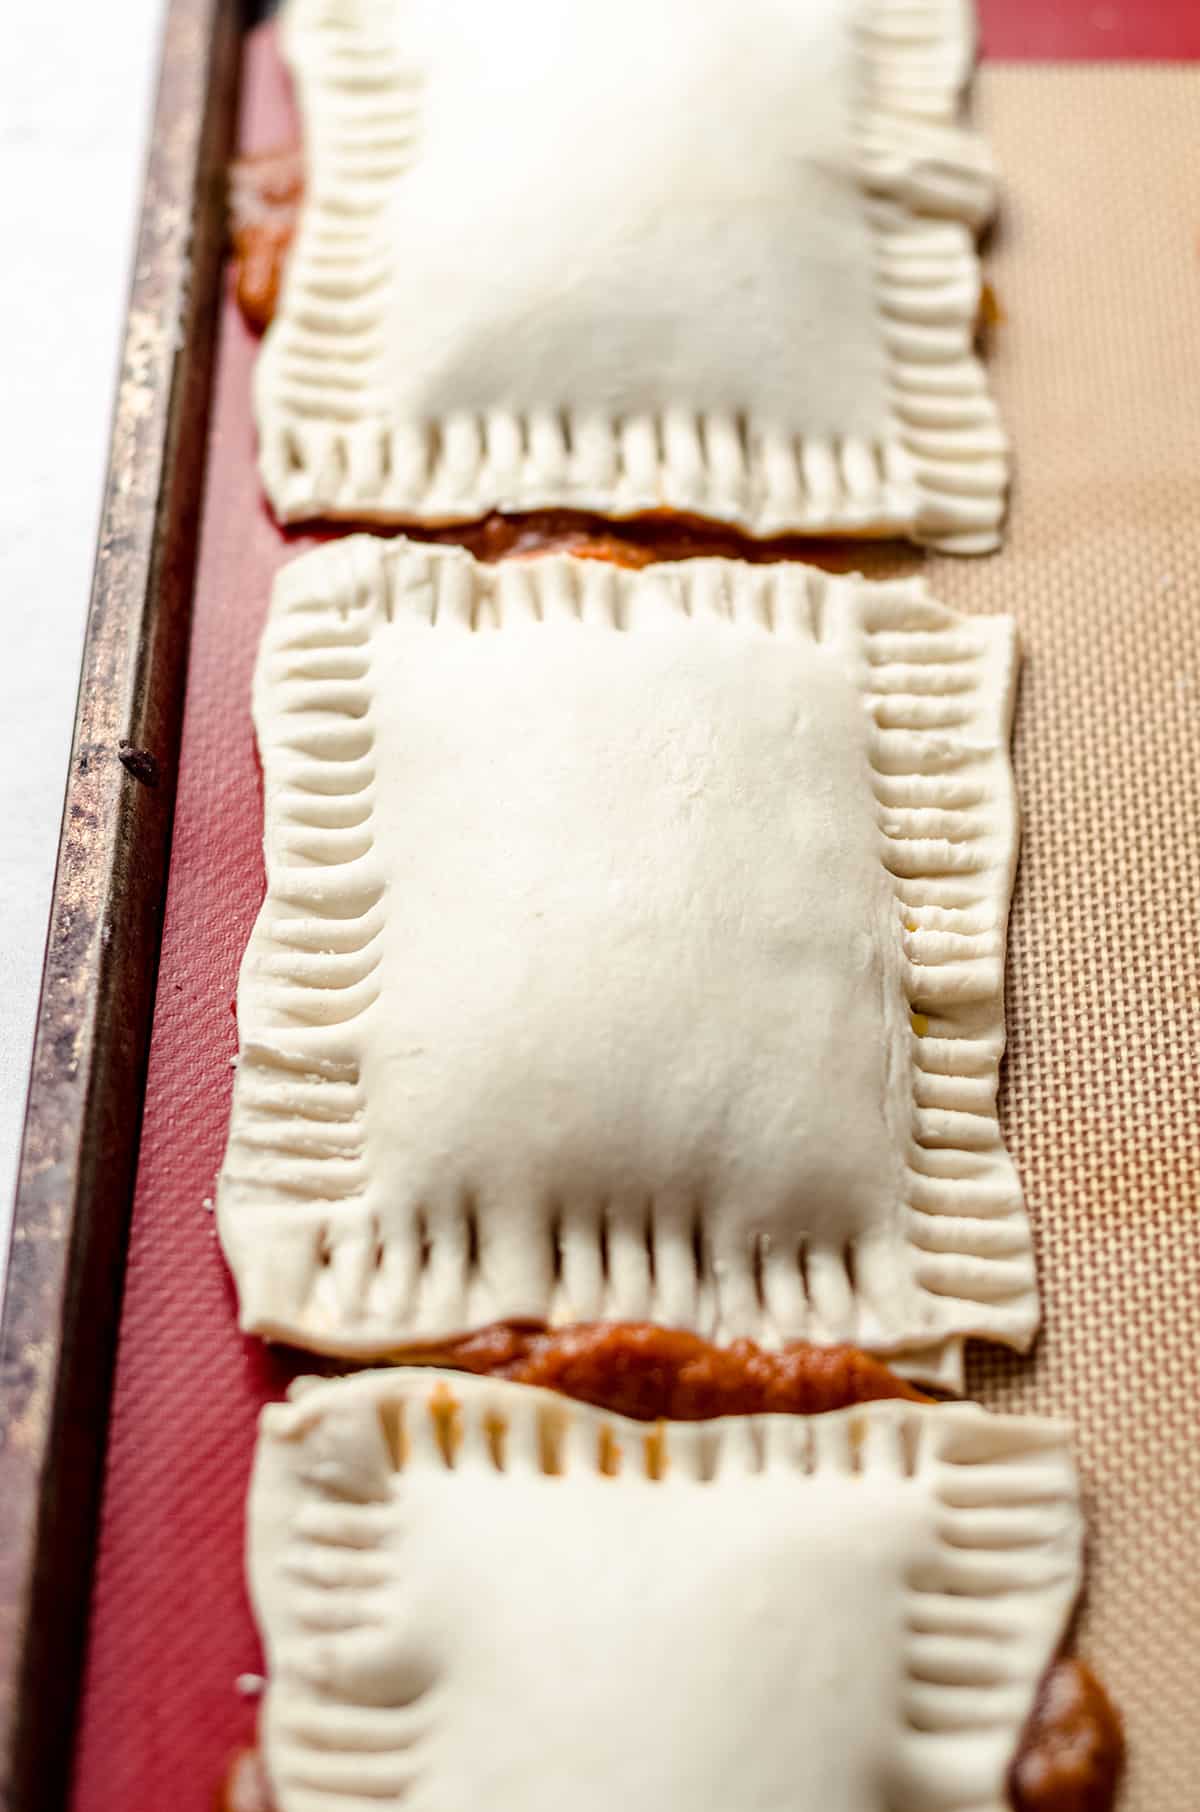 An unbaked hand pie with pinched edges.